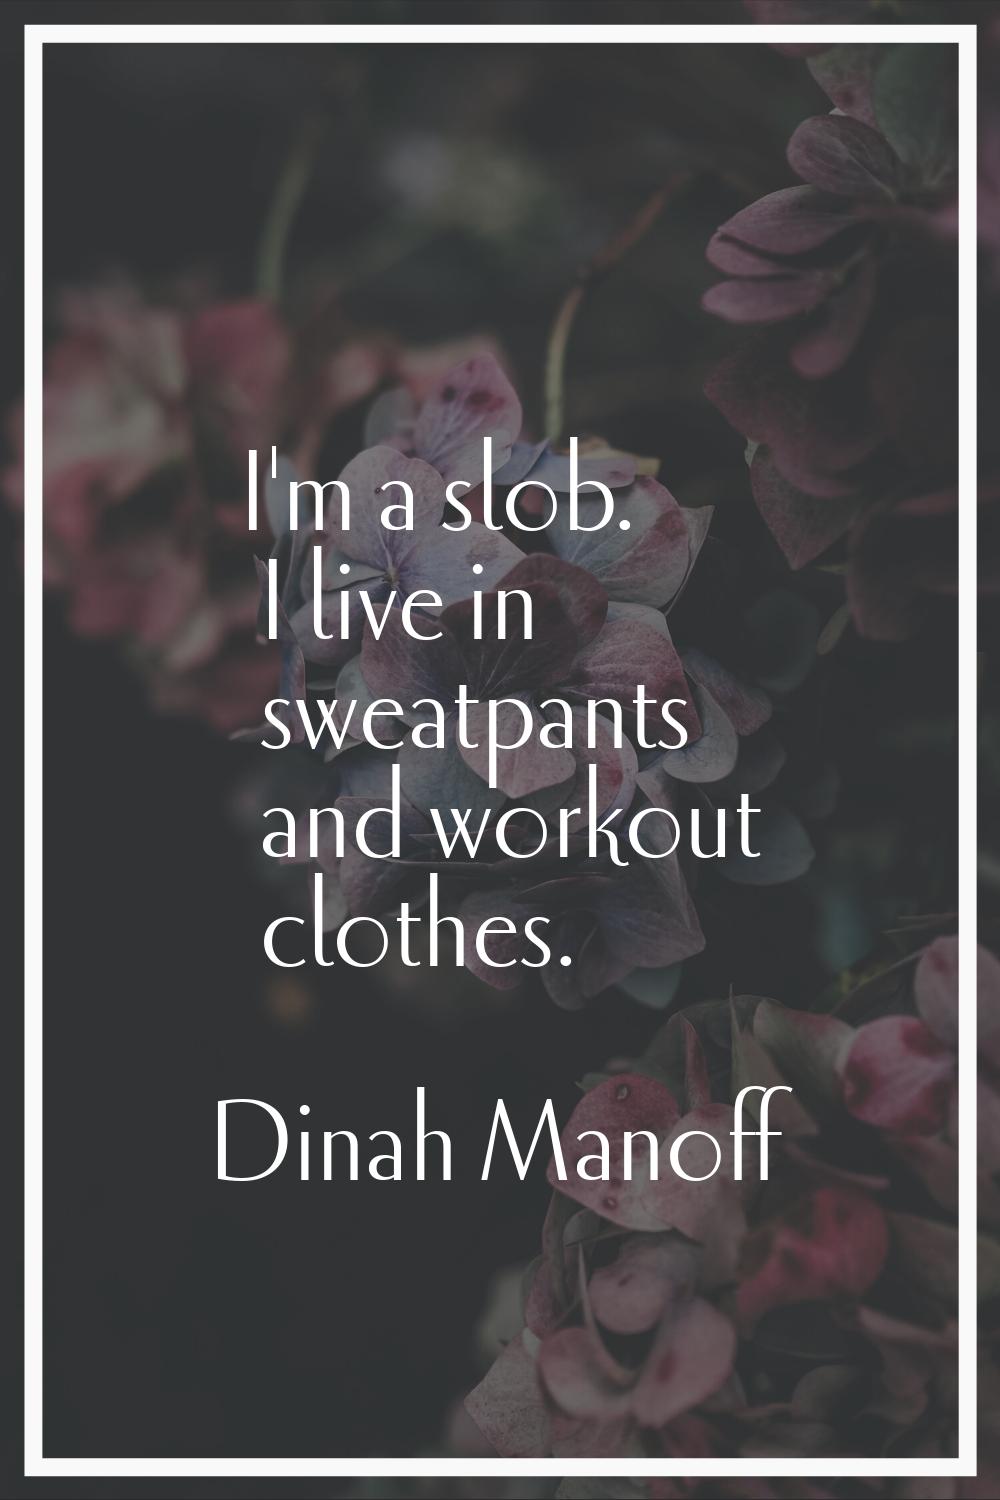 I'm a slob. I live in sweatpants and workout clothes.